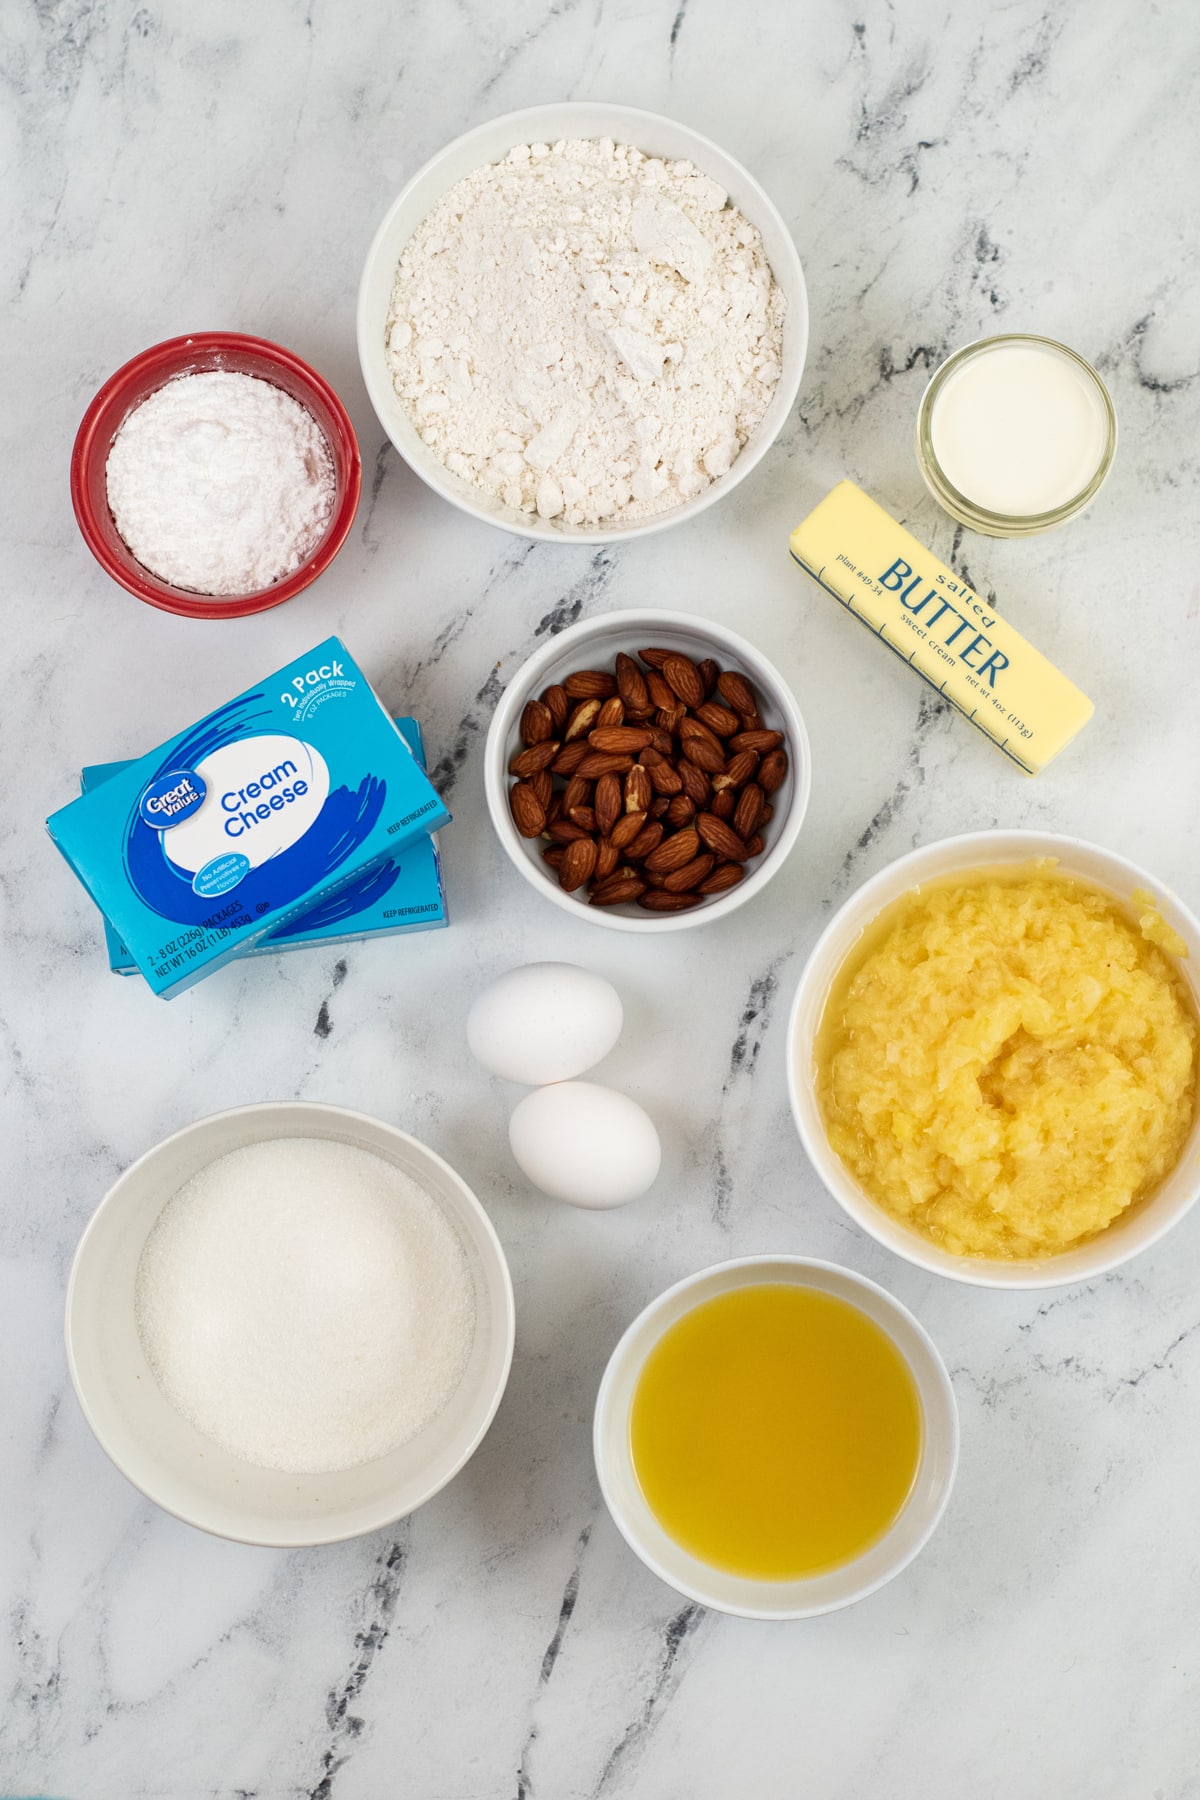 Ingredients for Pineapple Cheesecake Bars are the following: eggs, cream cheese, butter, crushed pineapples. pineapple juice, whipping cream and sugar